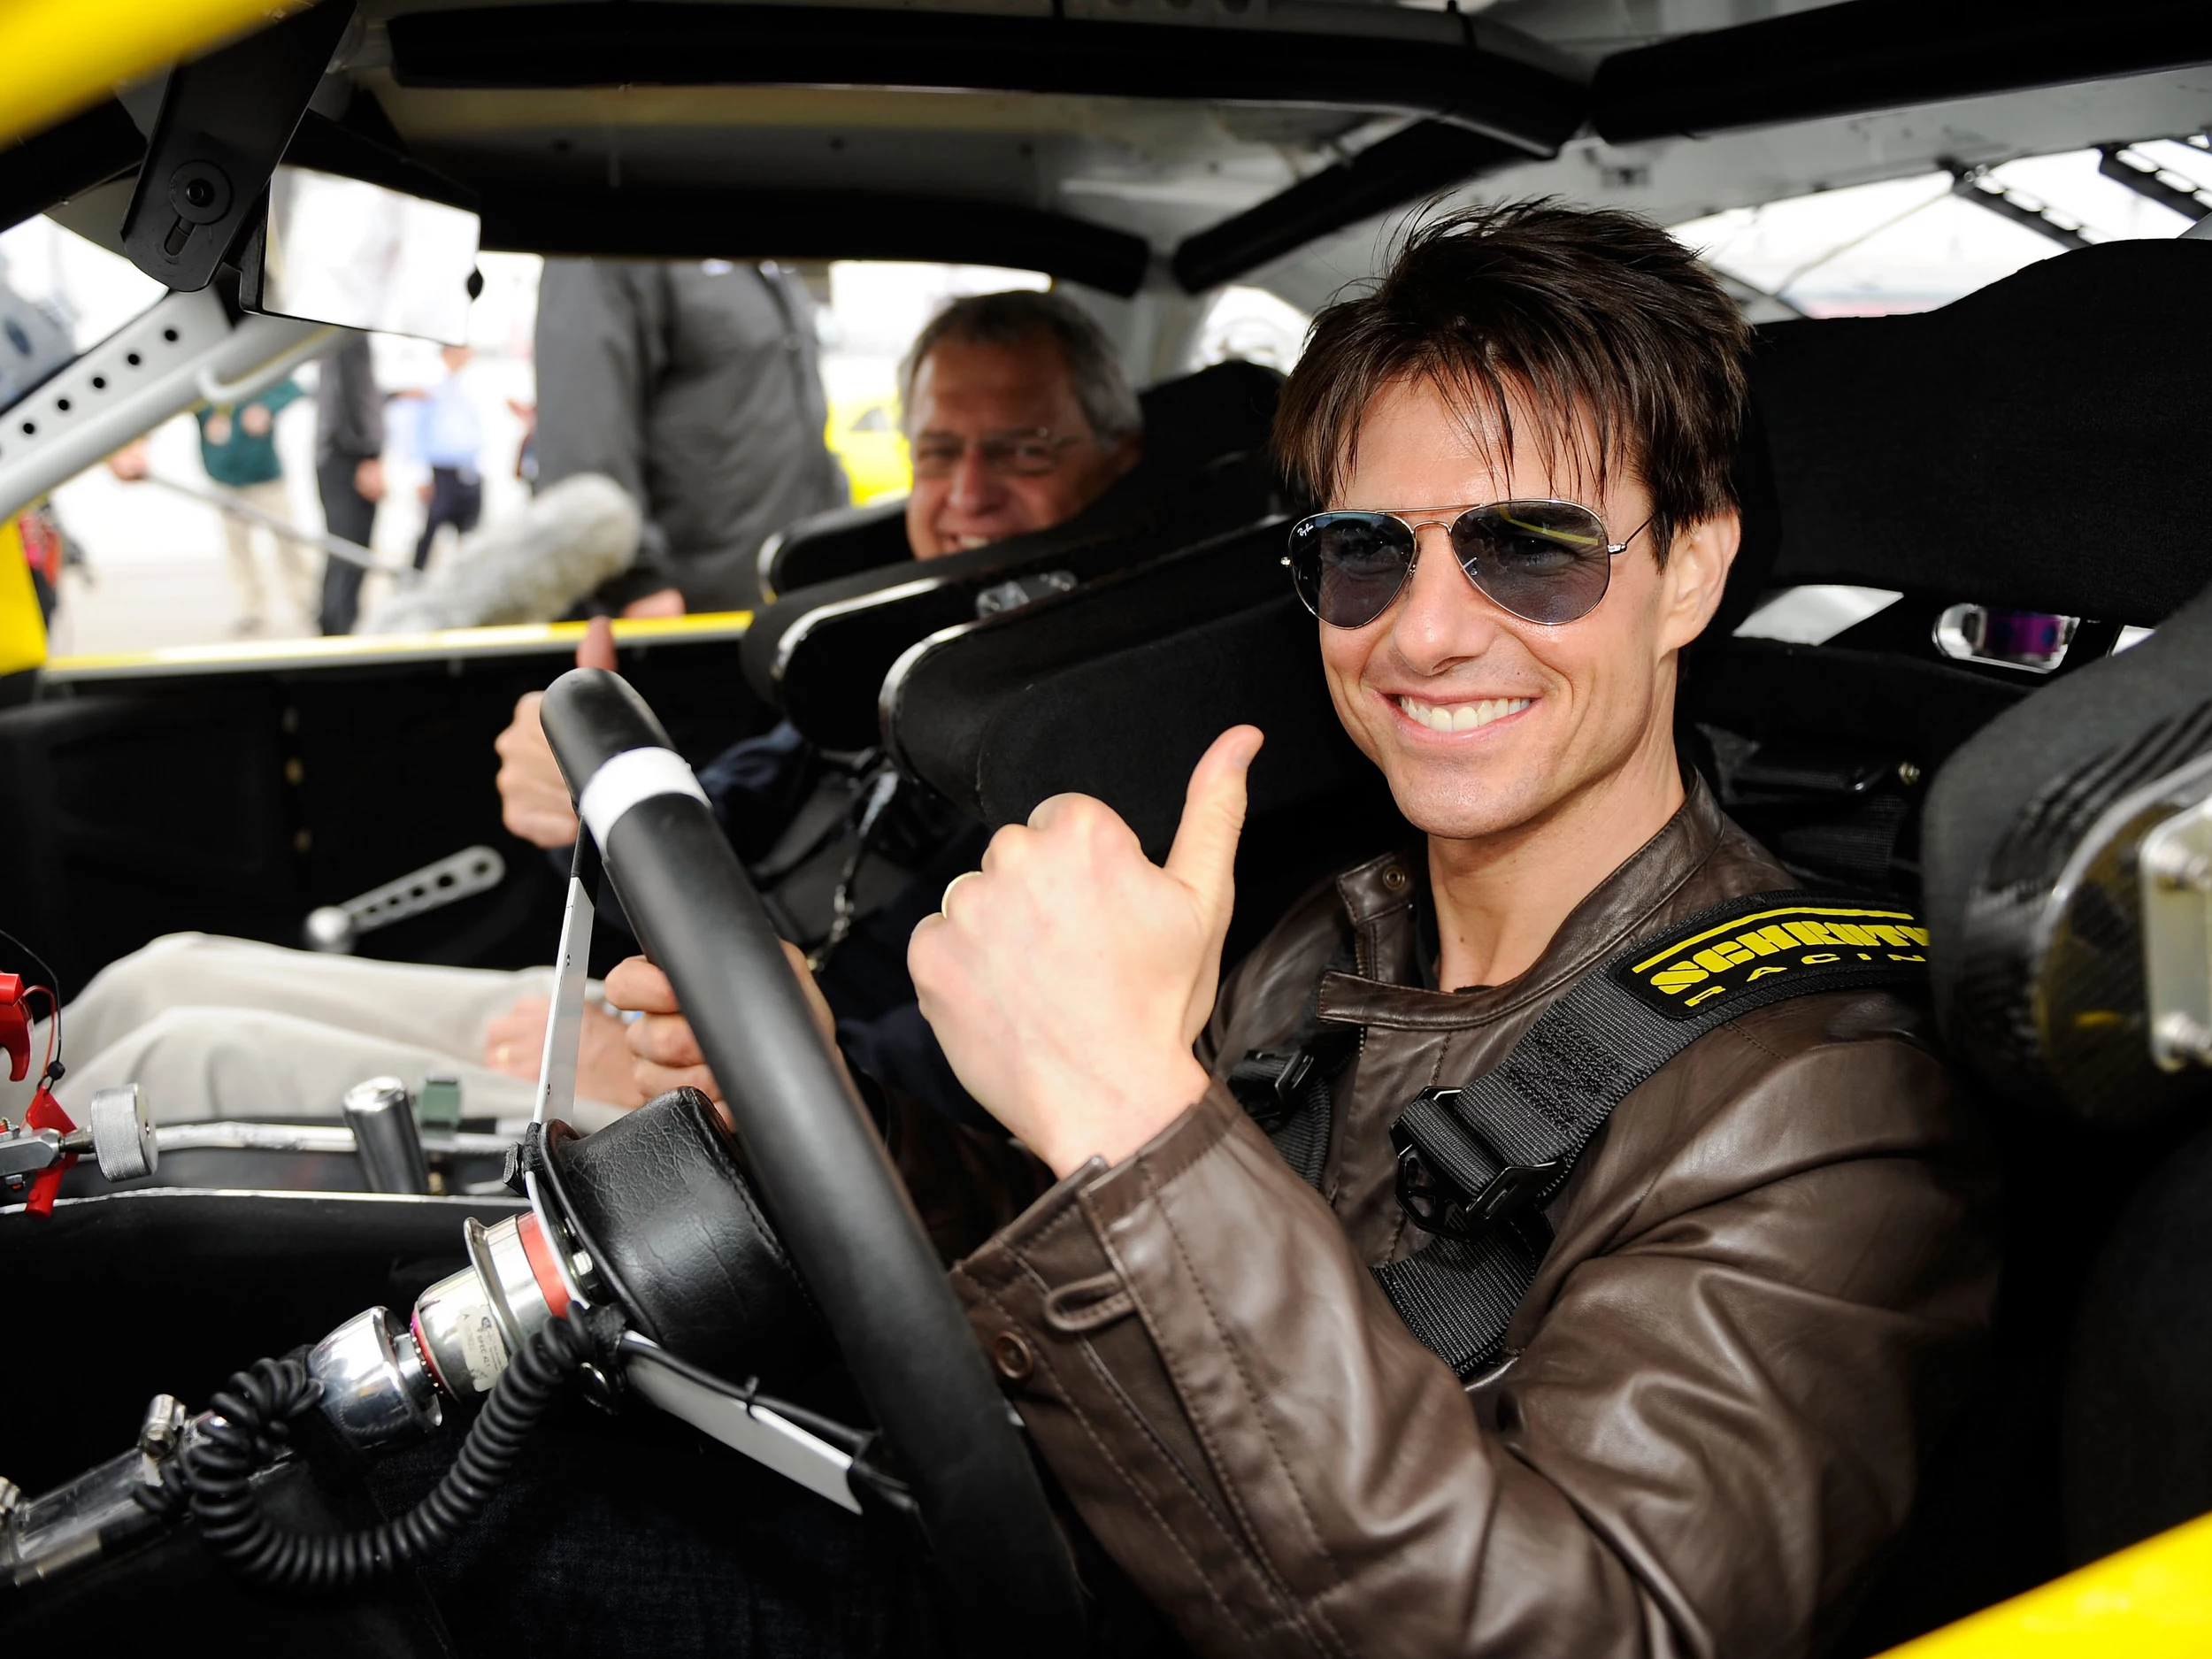 Tom Cruise Drives 181 MPH in a Race Car, Called 'The Real Deal'